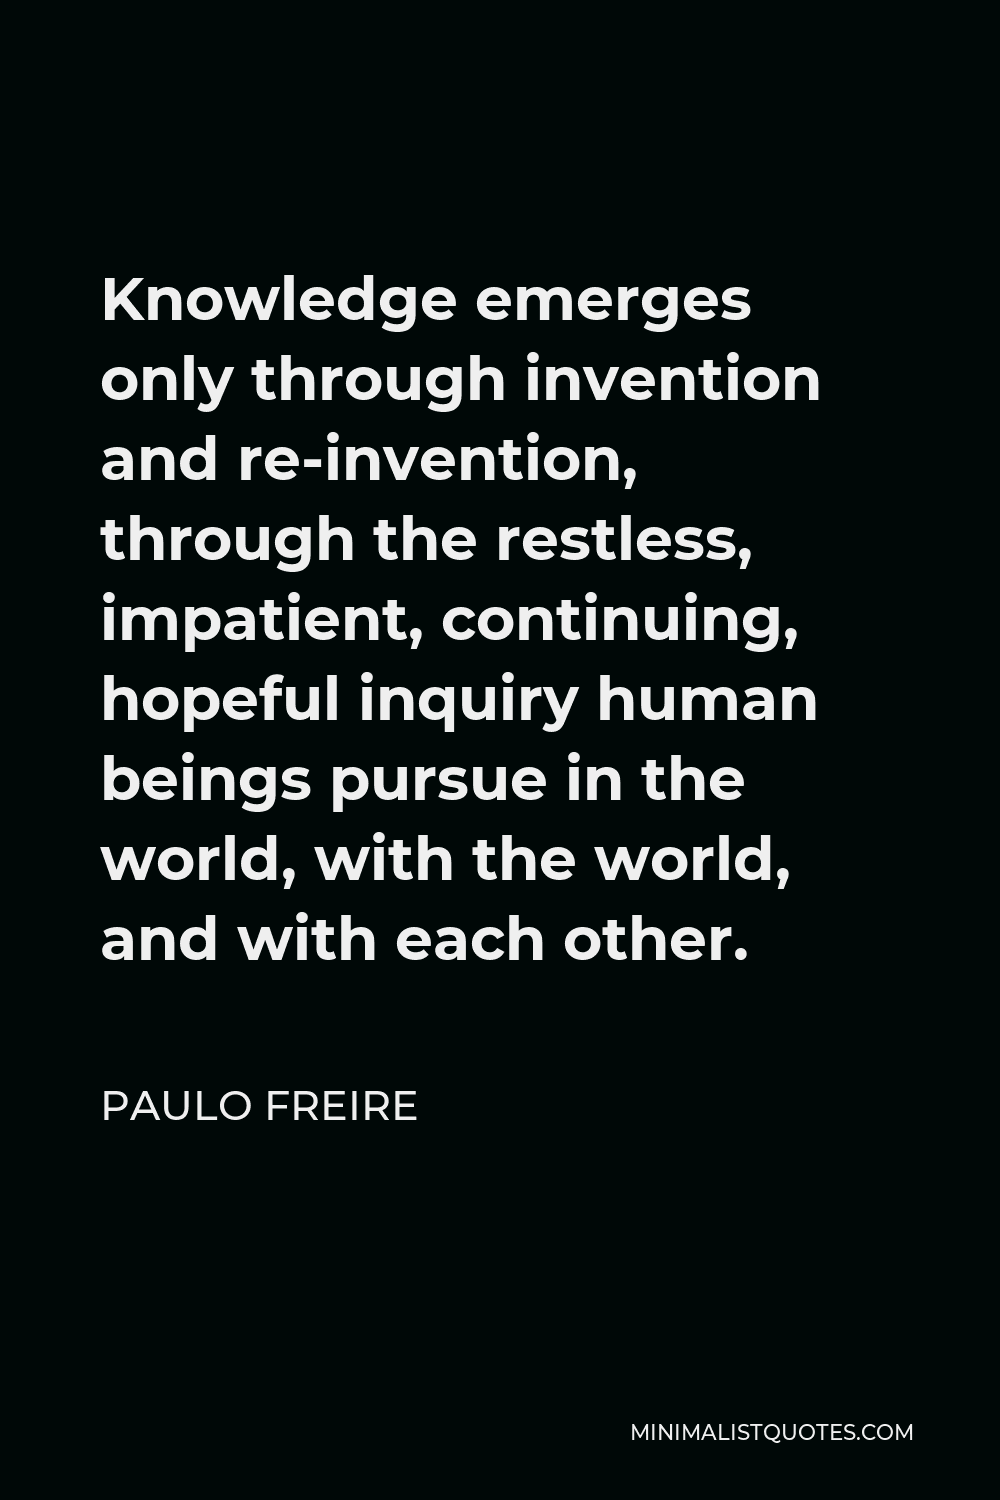 Paulo Freire Quote - Knowledge emerges only through invention and re-invention, through the restless, impatient, continuing, hopeful inquiry human beings pursue in the world, with the world, and with each other.